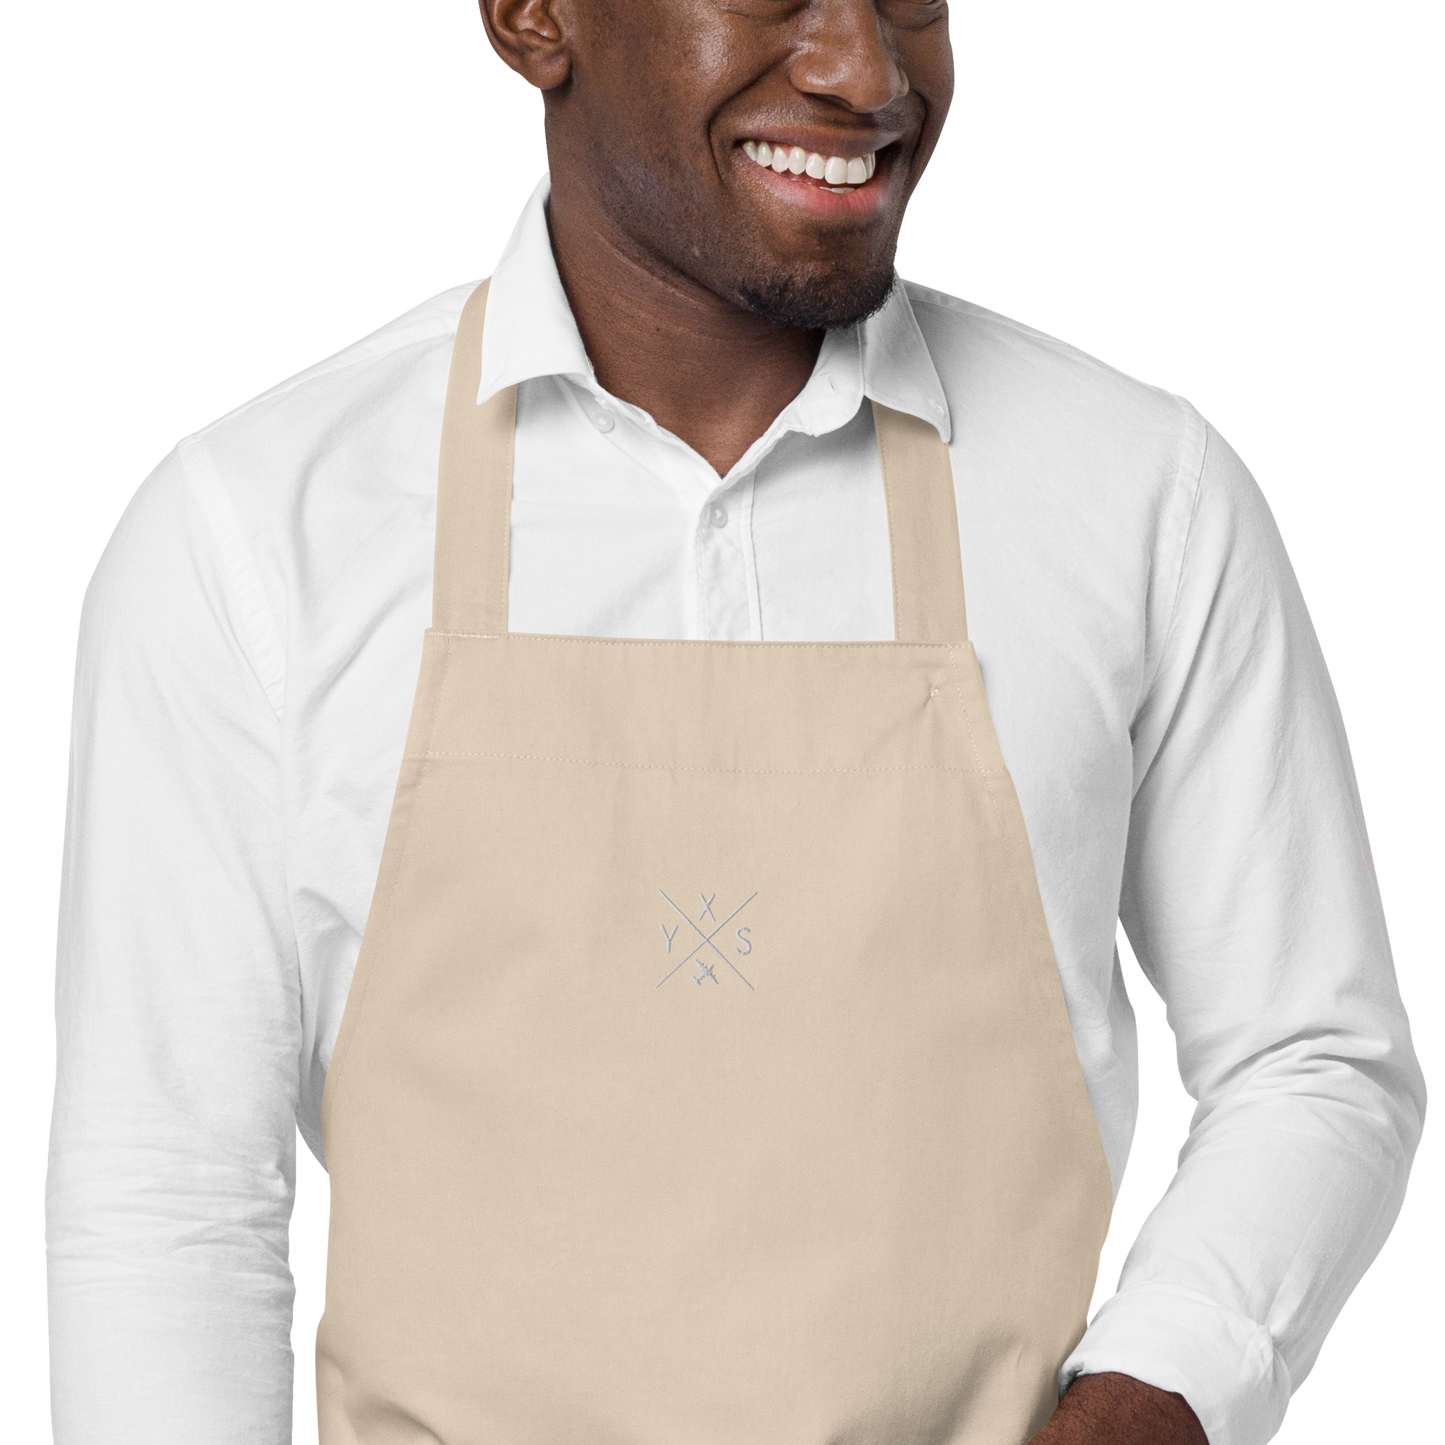 YHM Designs - YXS Prince George Organic Cotton Apron - Crossed-X Design with Airport Code and Vintage Propliner - White Embroidery - Image 13